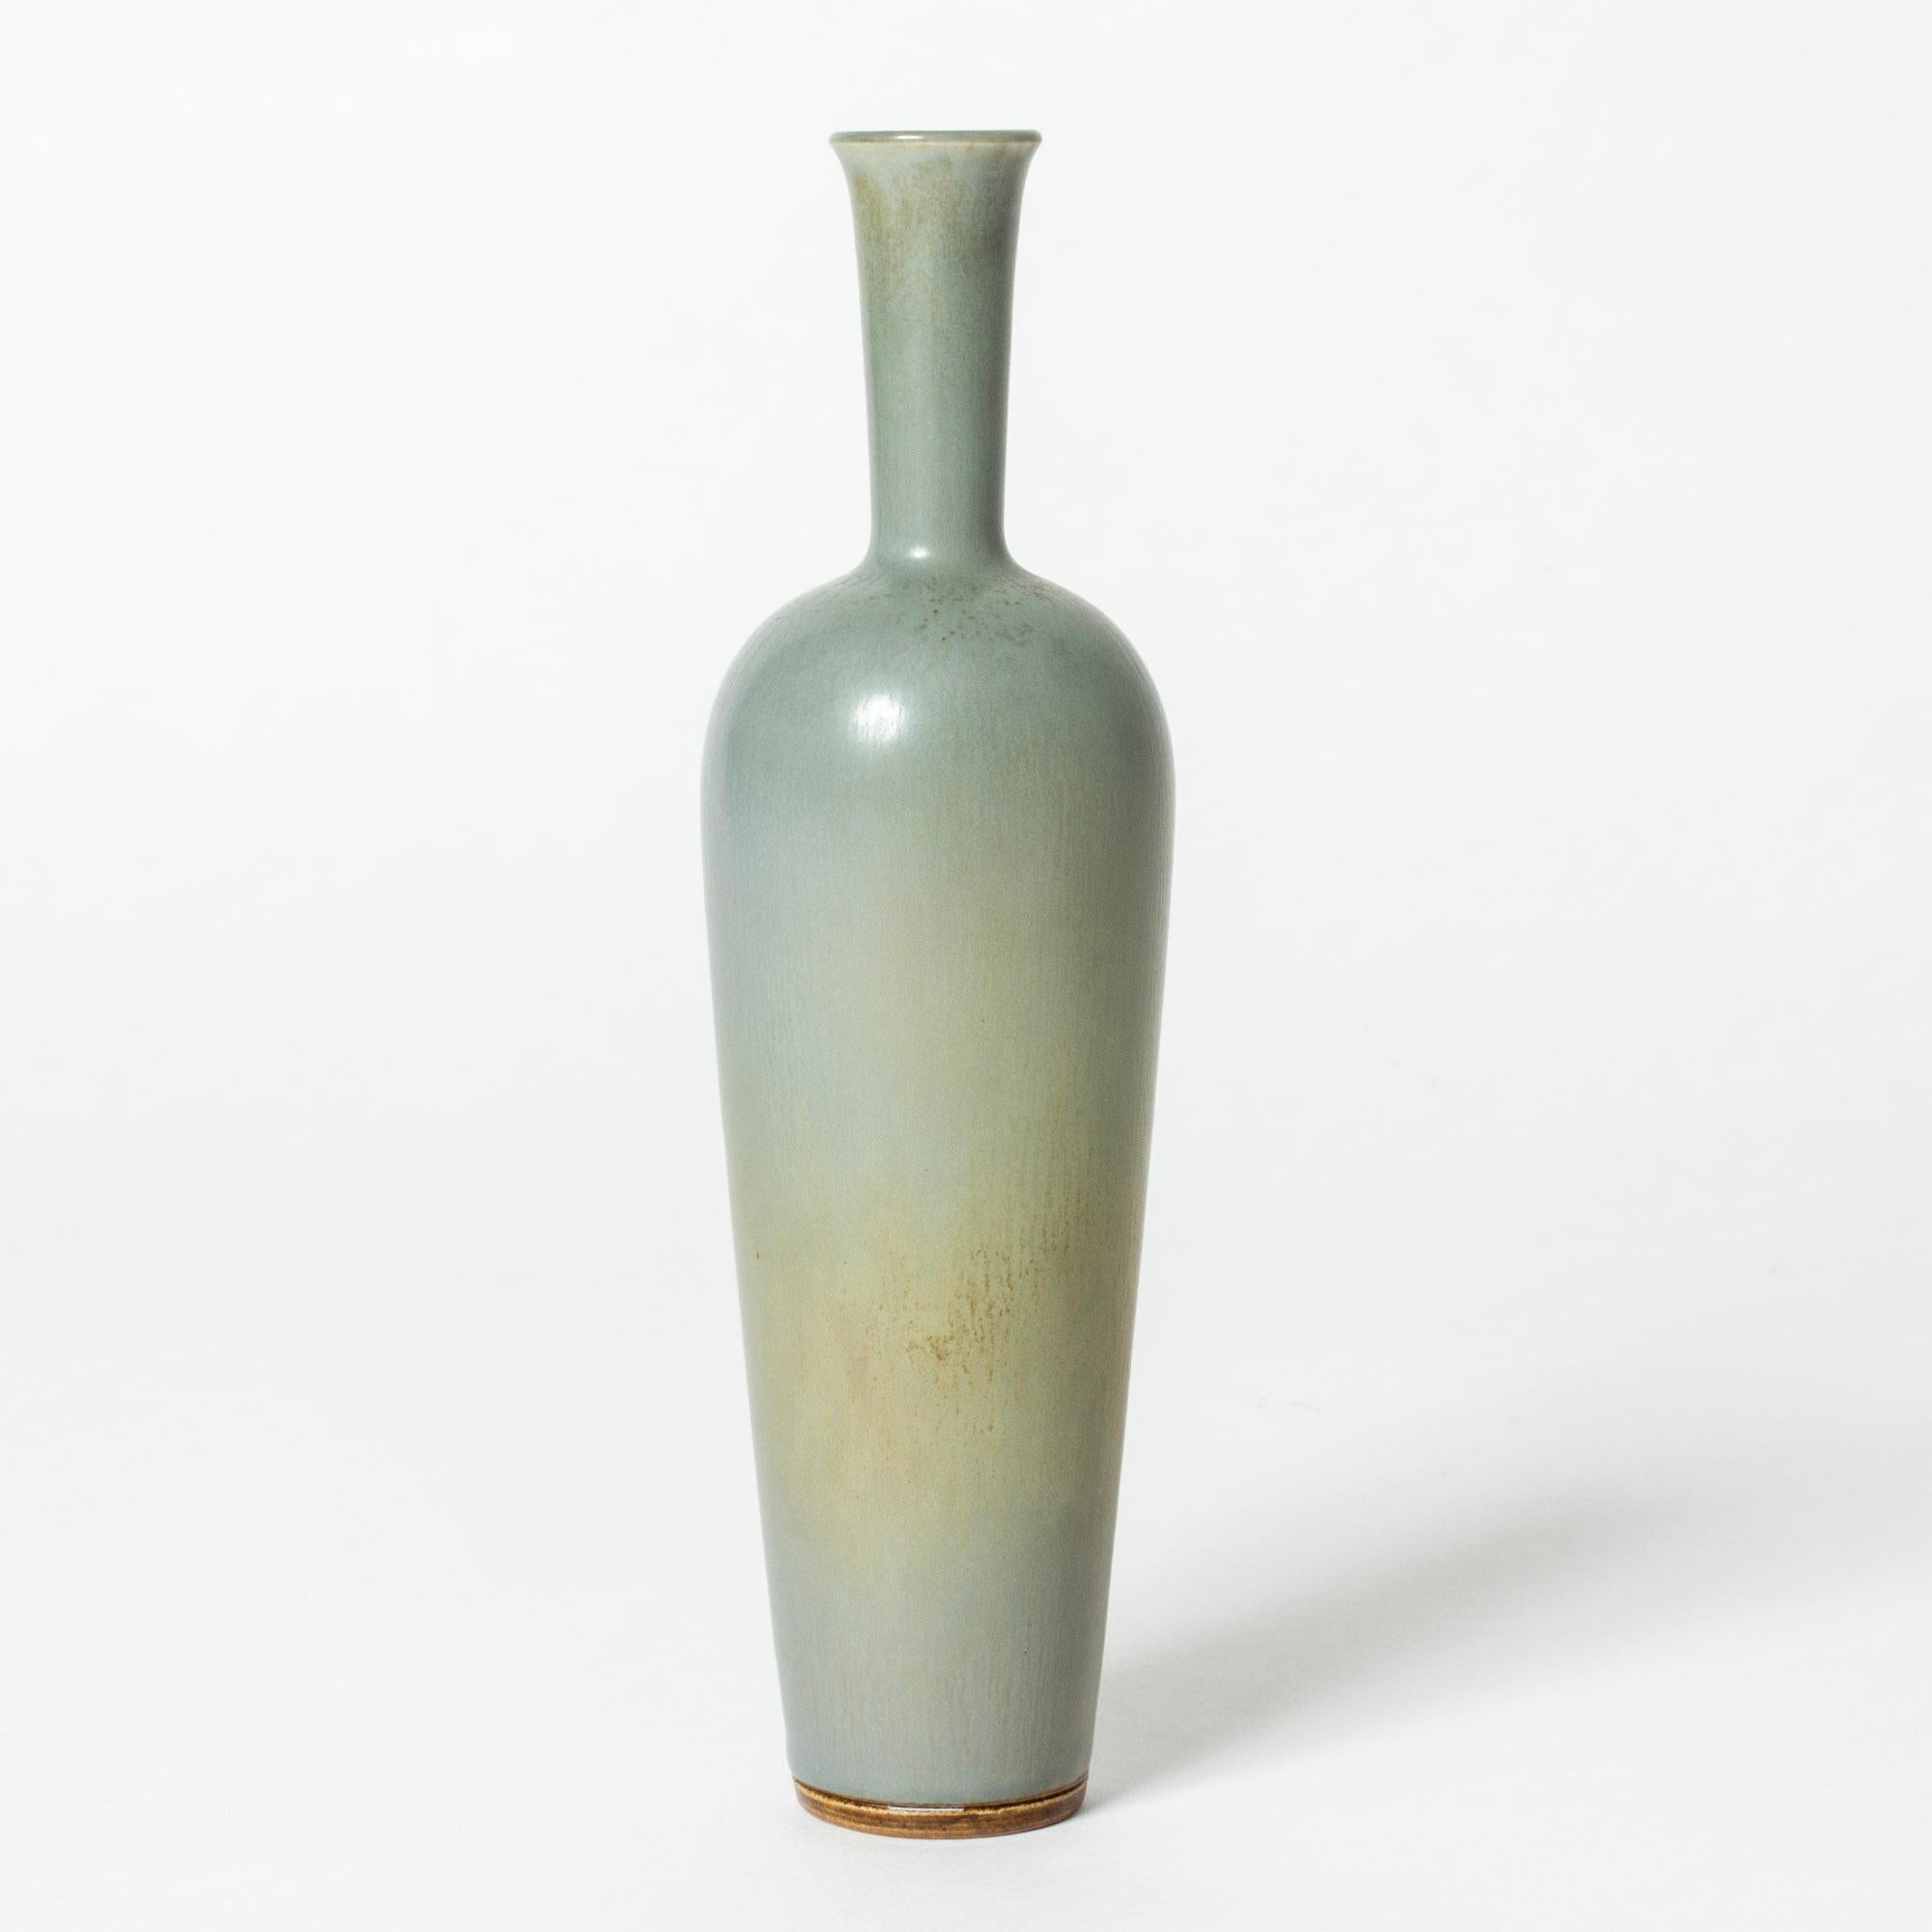 Stoneware vase by Berndt Friberg in an elegant form with pale celadon colored hare’s fur glaze and contrasting rusty nuances.

Berndt Friberg was a Swedish ceramicist, renowned for his stoneware vases and vessels for Gustavsberg. His pure, composed